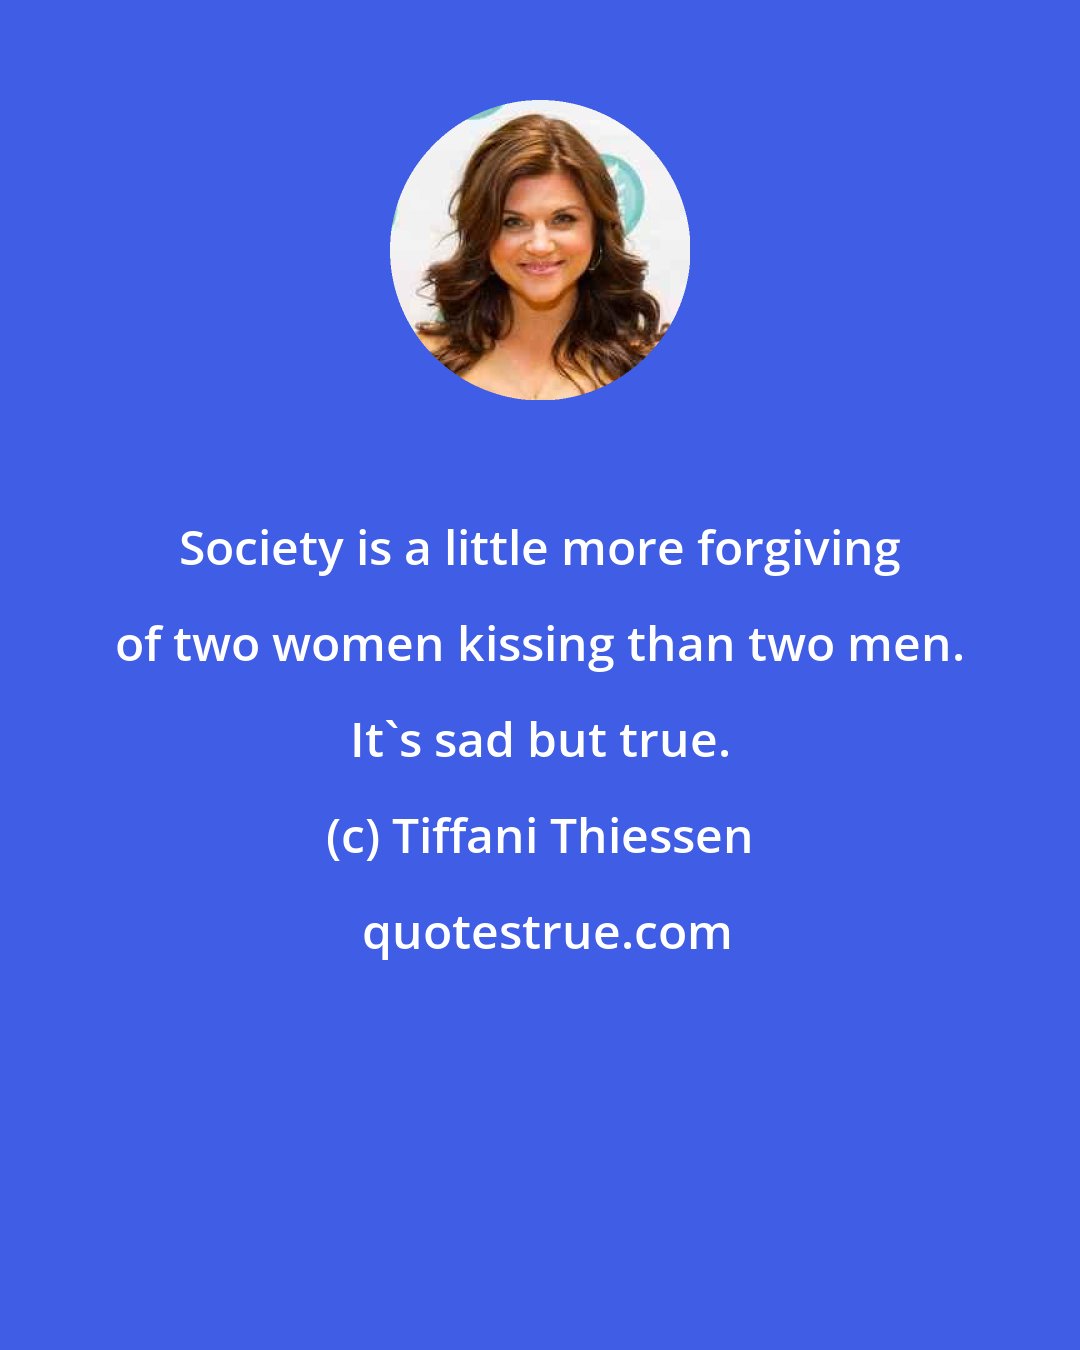 Tiffani Thiessen: Society is a little more forgiving of two women kissing than two men. It's sad but true.